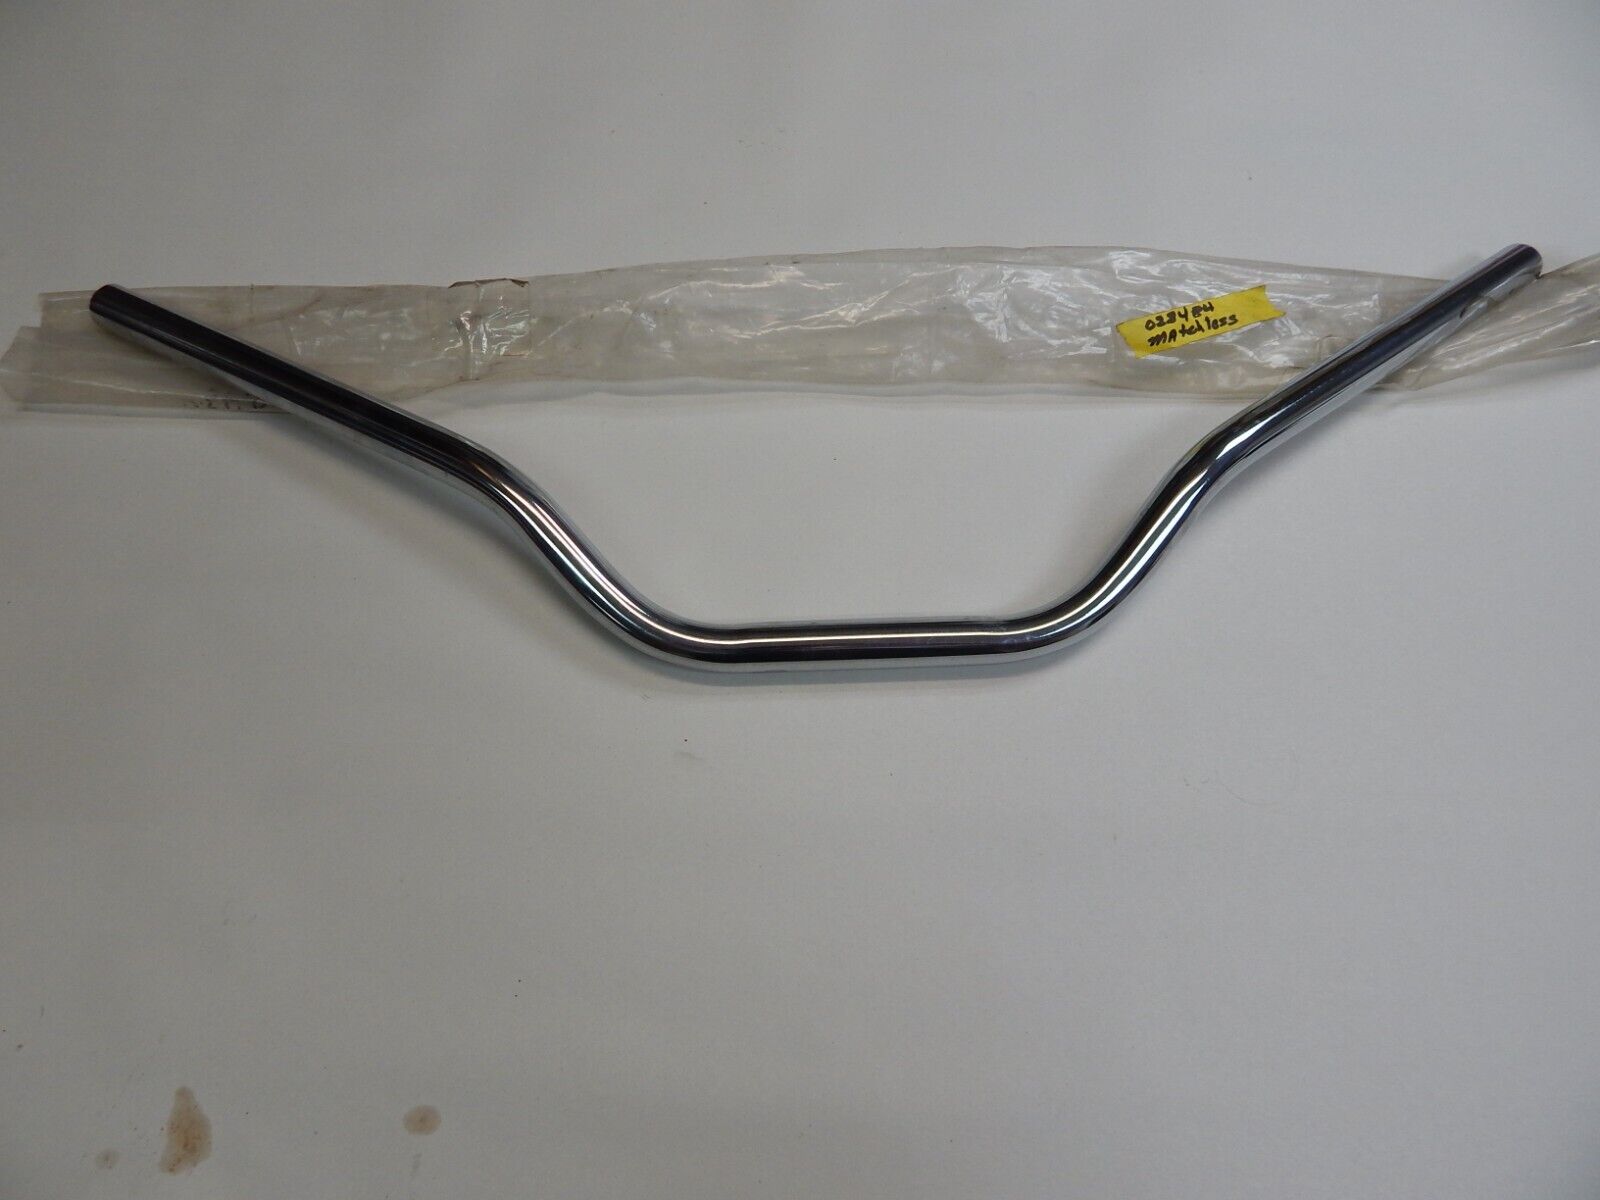 NORTON MATCHLESS AJS FACTORY HANDLEBARS MADE IN ENGLAND 022484 02-2484 G80 G12